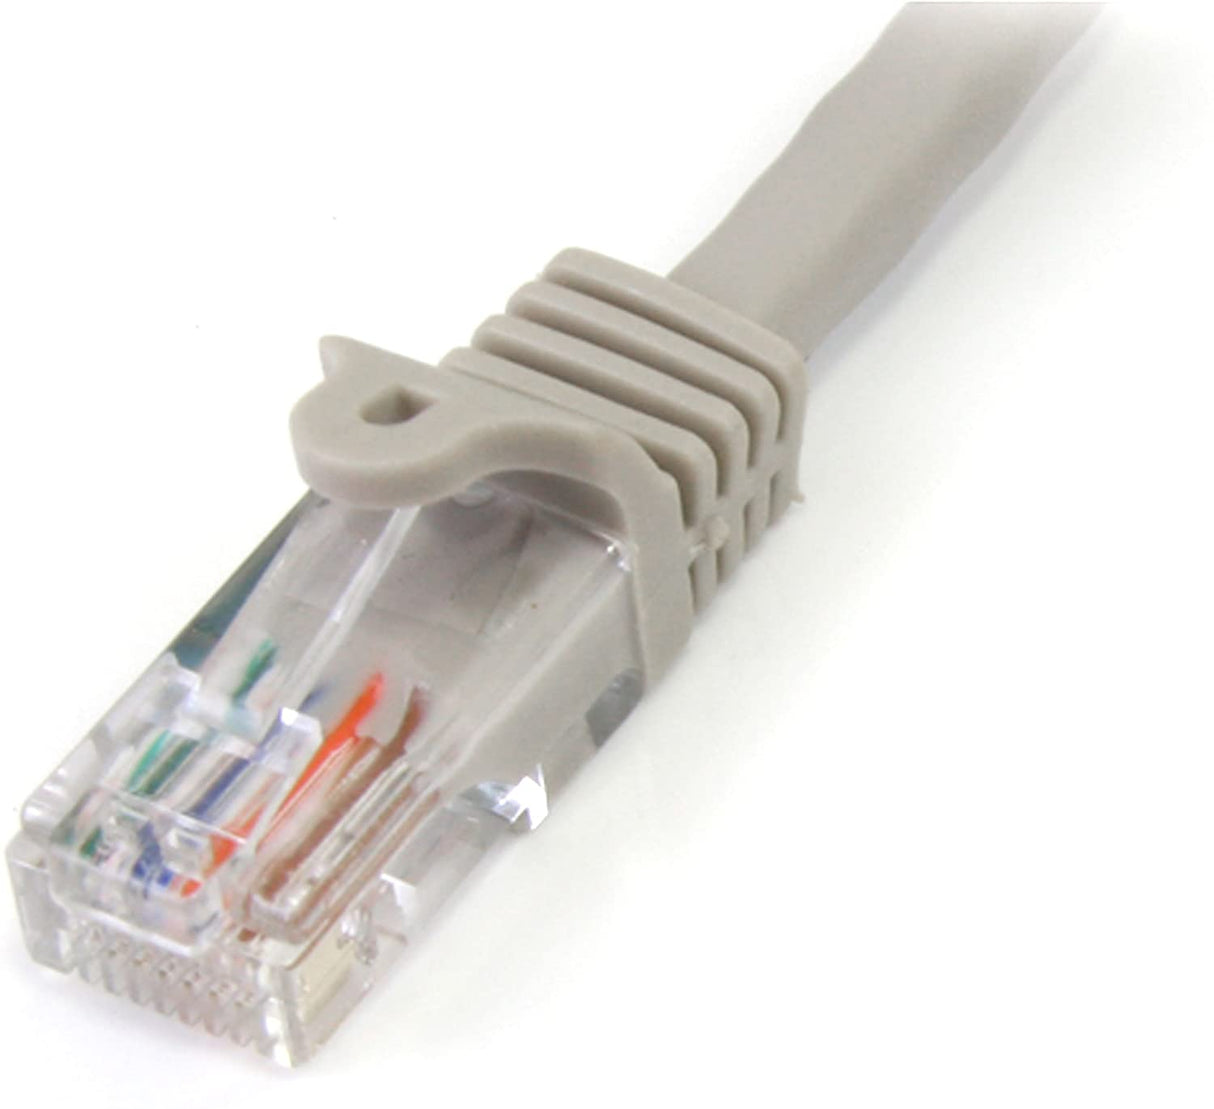 StarTech.com Cat5e Ethernet Cable - 1 ft - Gray- Patch Cable - Snagless Cat5e Cable - Short Network Cable - Ethernet Cord - Cat 5e Cable - 1ft (45PATCH1GR) 1 ft / 30cm Grey